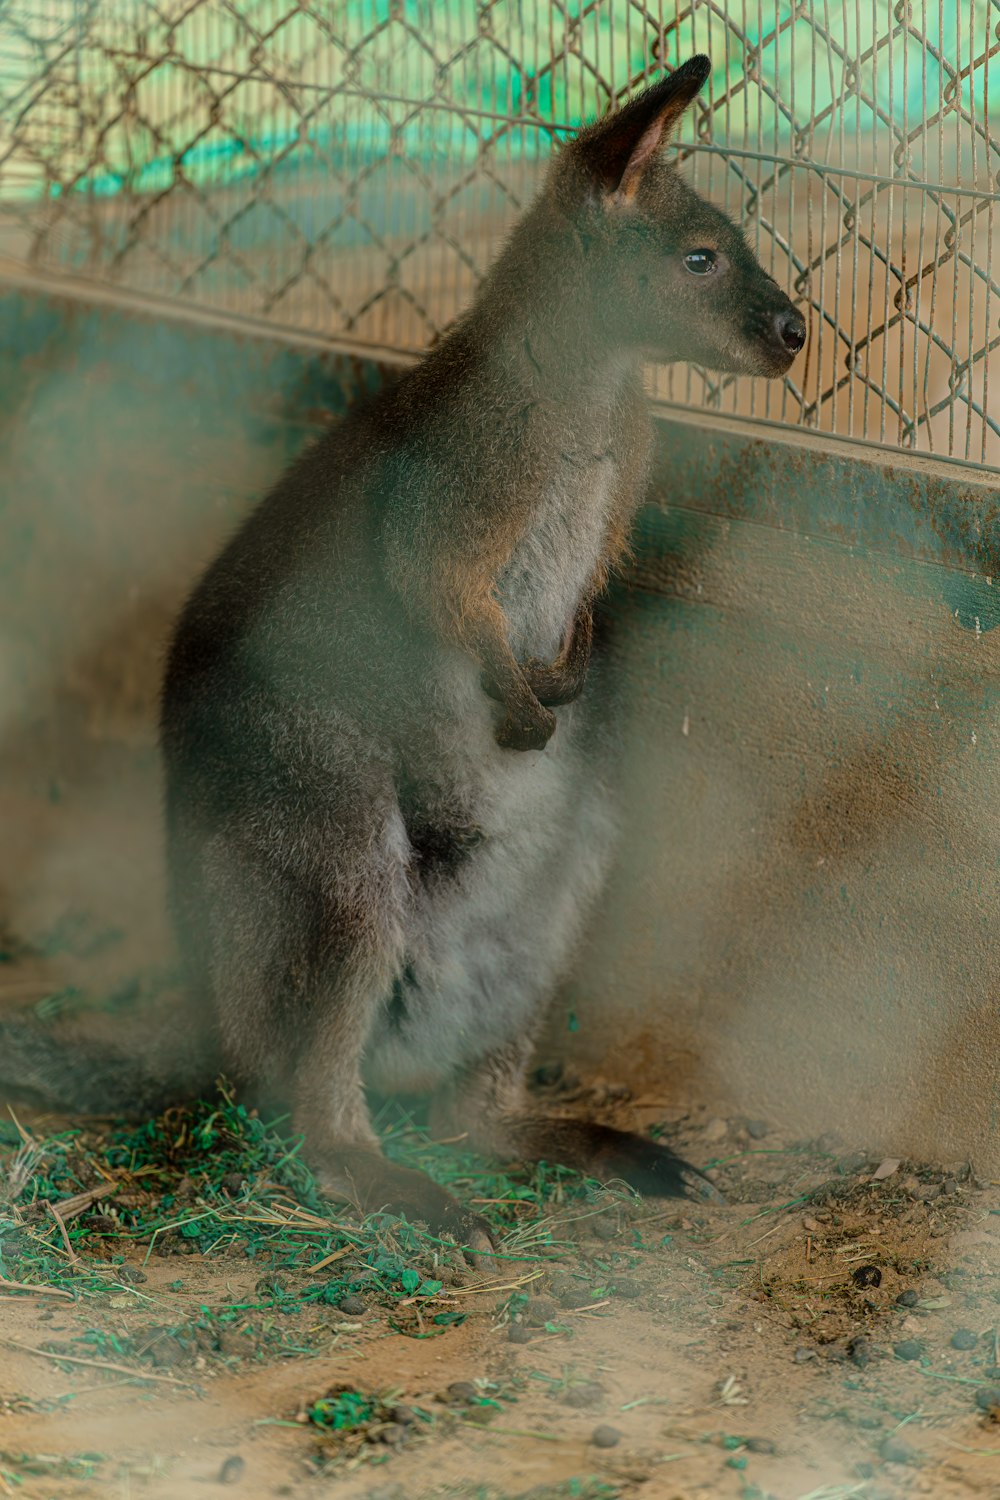 a kangaroo standing on its hind legs in a cage